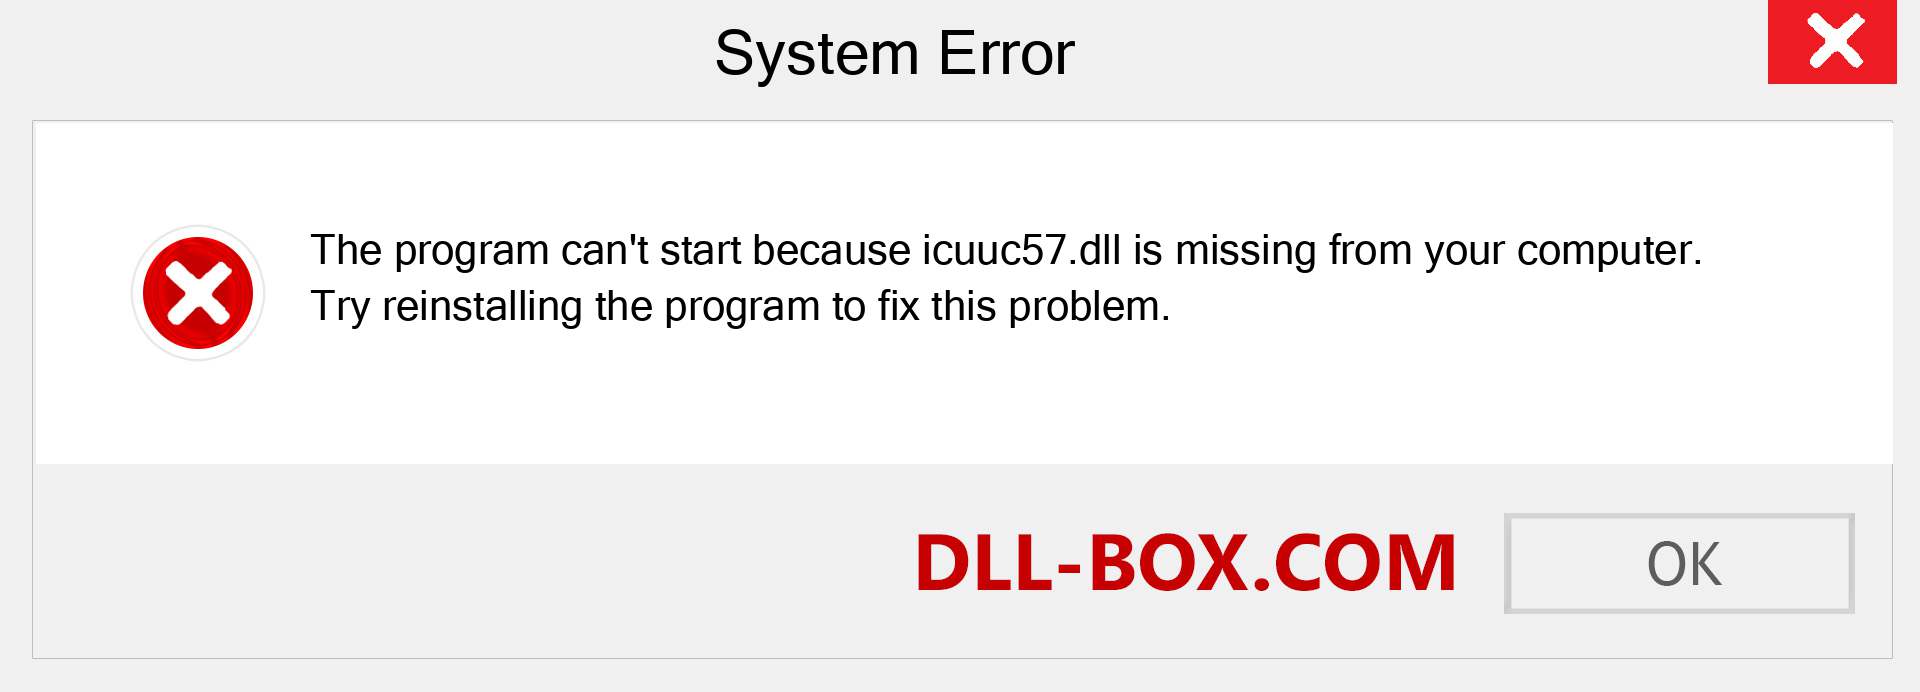  icuuc57.dll file is missing?. Download for Windows 7, 8, 10 - Fix  icuuc57 dll Missing Error on Windows, photos, images